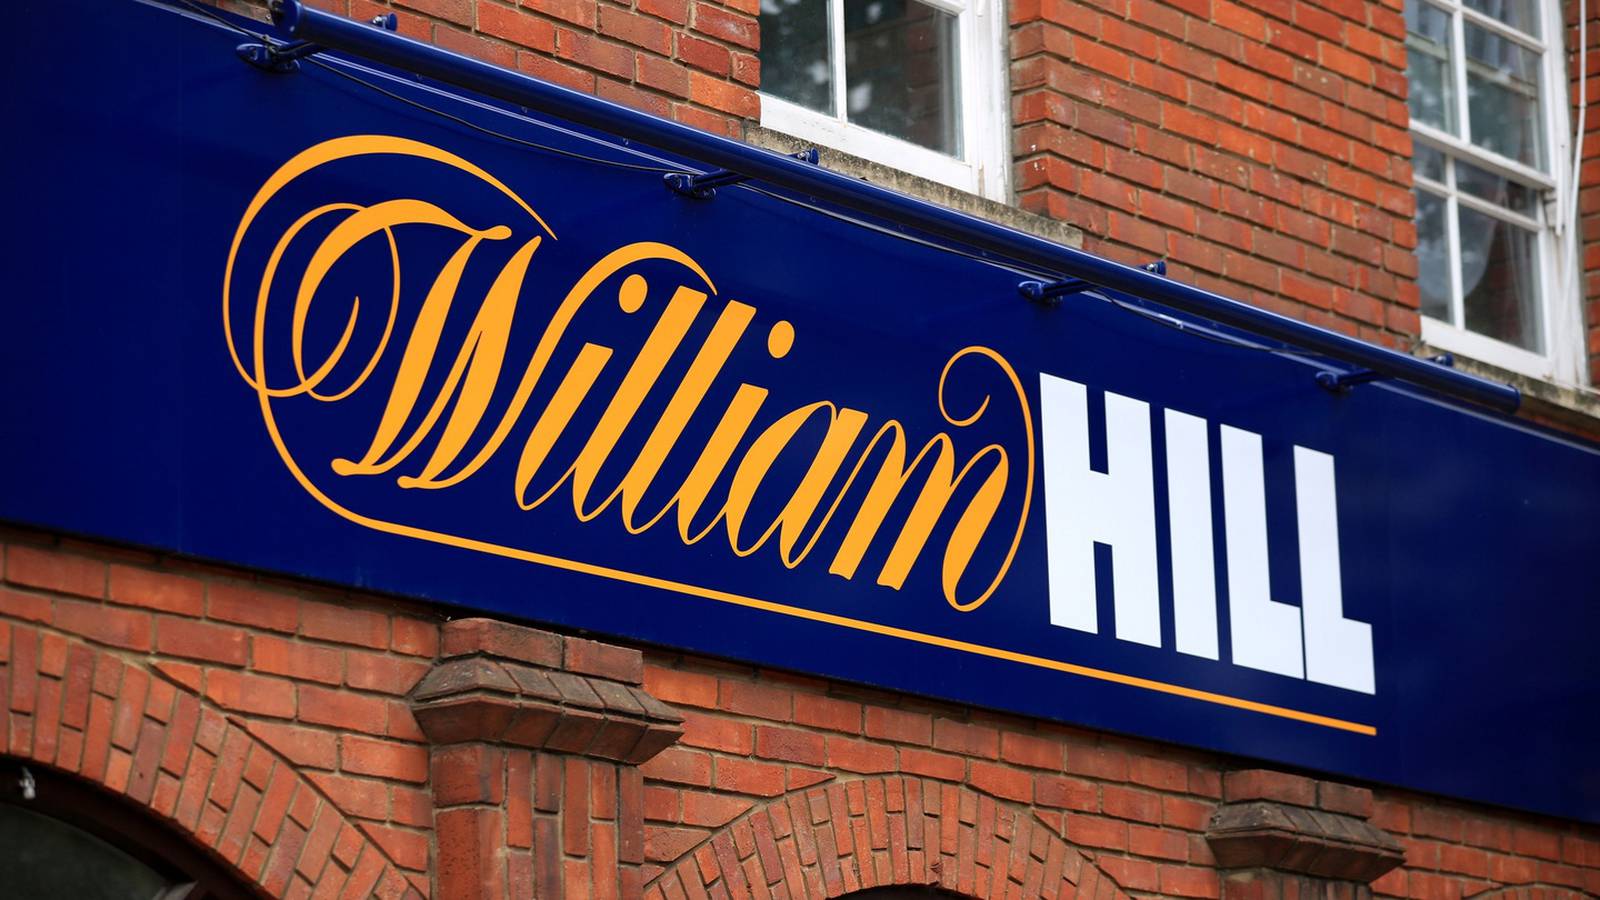 UK's William Hill given record $24 million fine for gambling failures